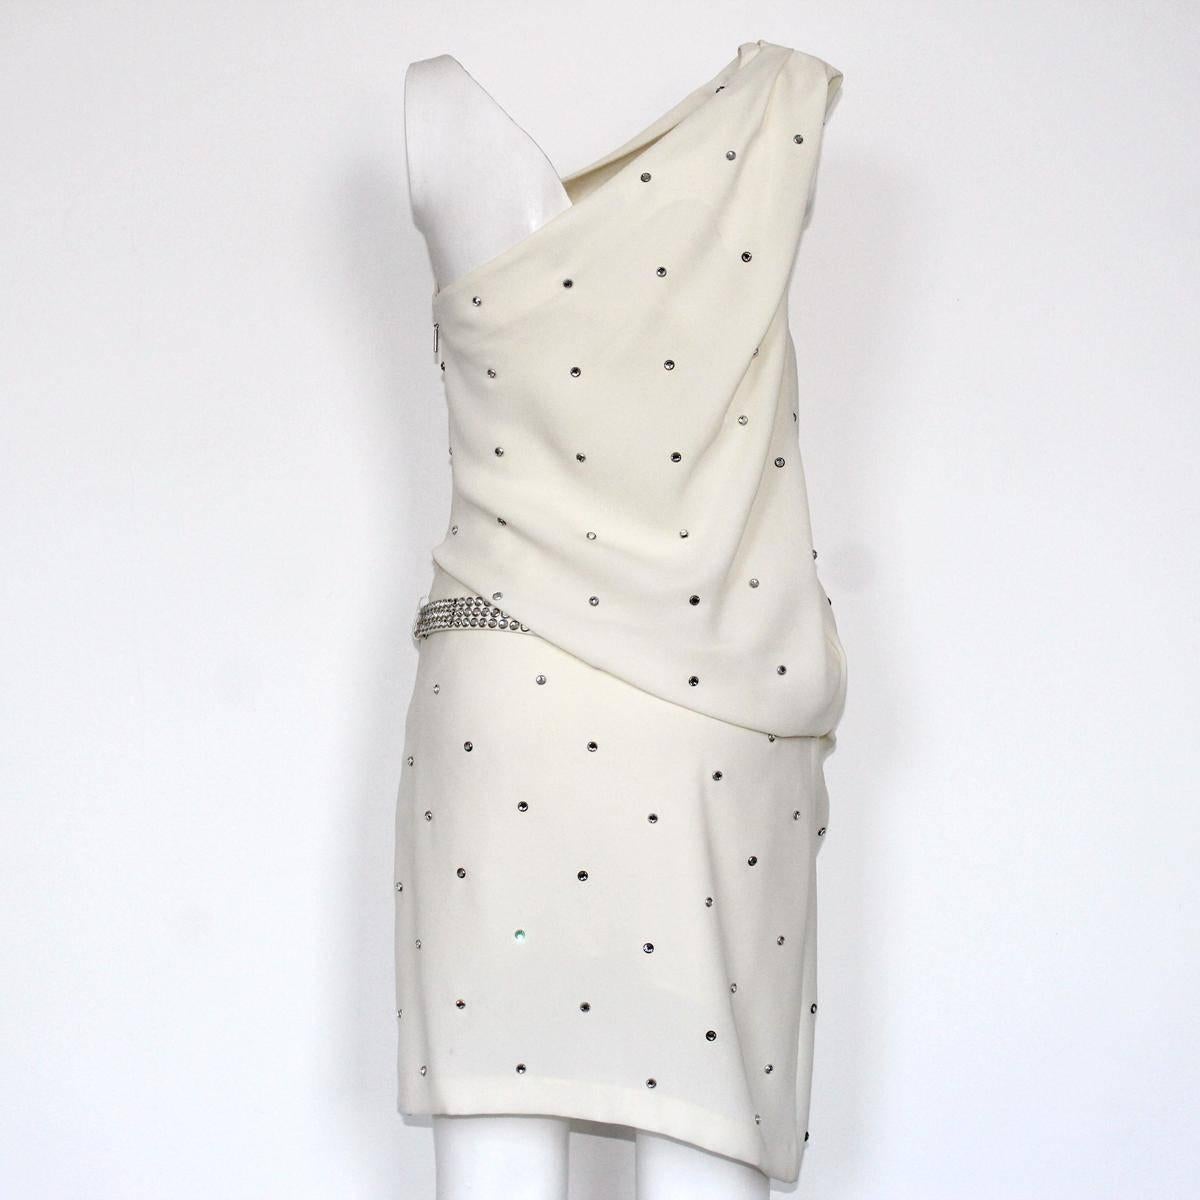 Super cool Roberto Cavalli dress
Polyester
One shoulder
White cream color
Applied strass
With belt
Total lenght cm 105 (41.3 inches)
Worldwide express shipping included in the price !